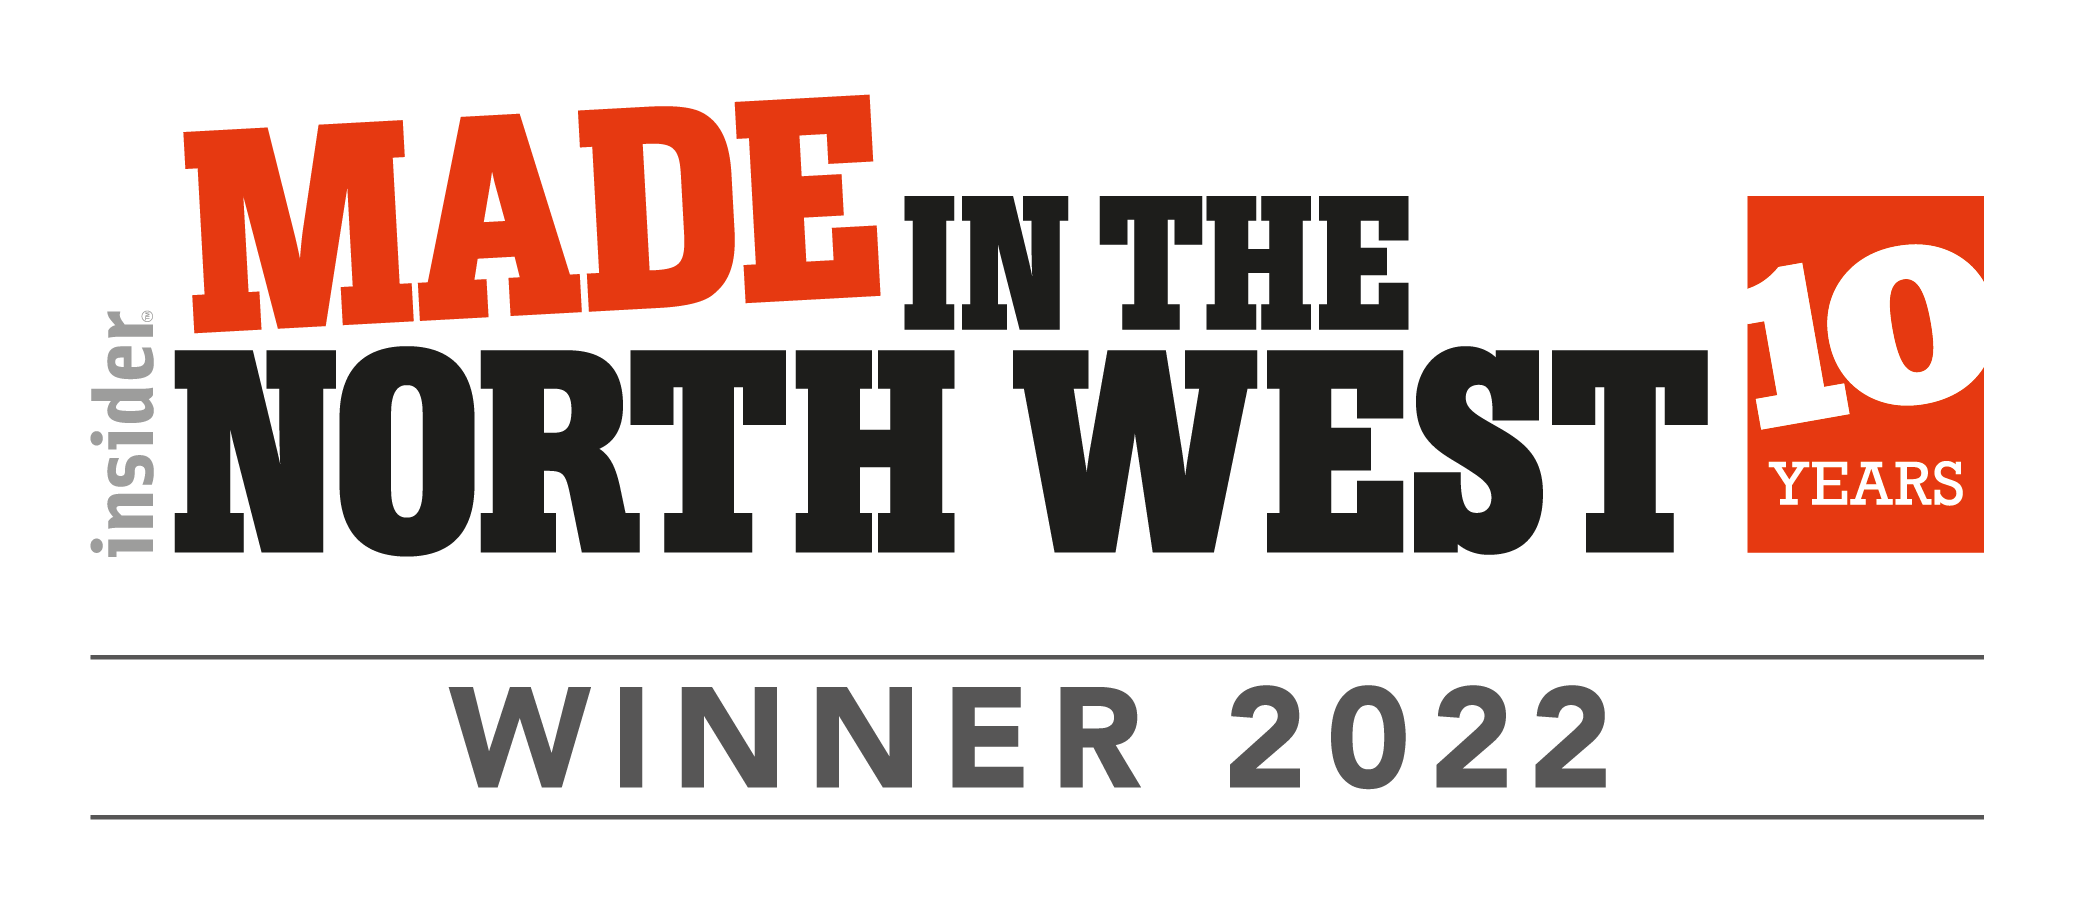 Made in the North West 2022